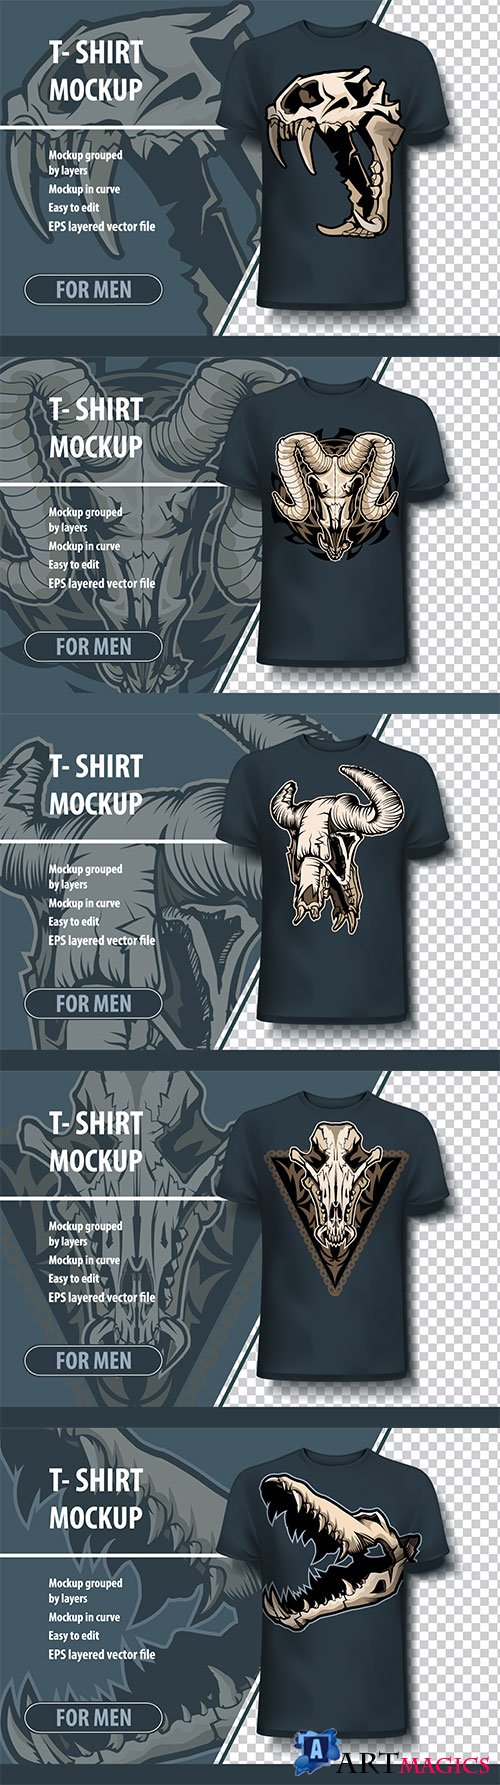 Mock-up template for printing on T-shirts